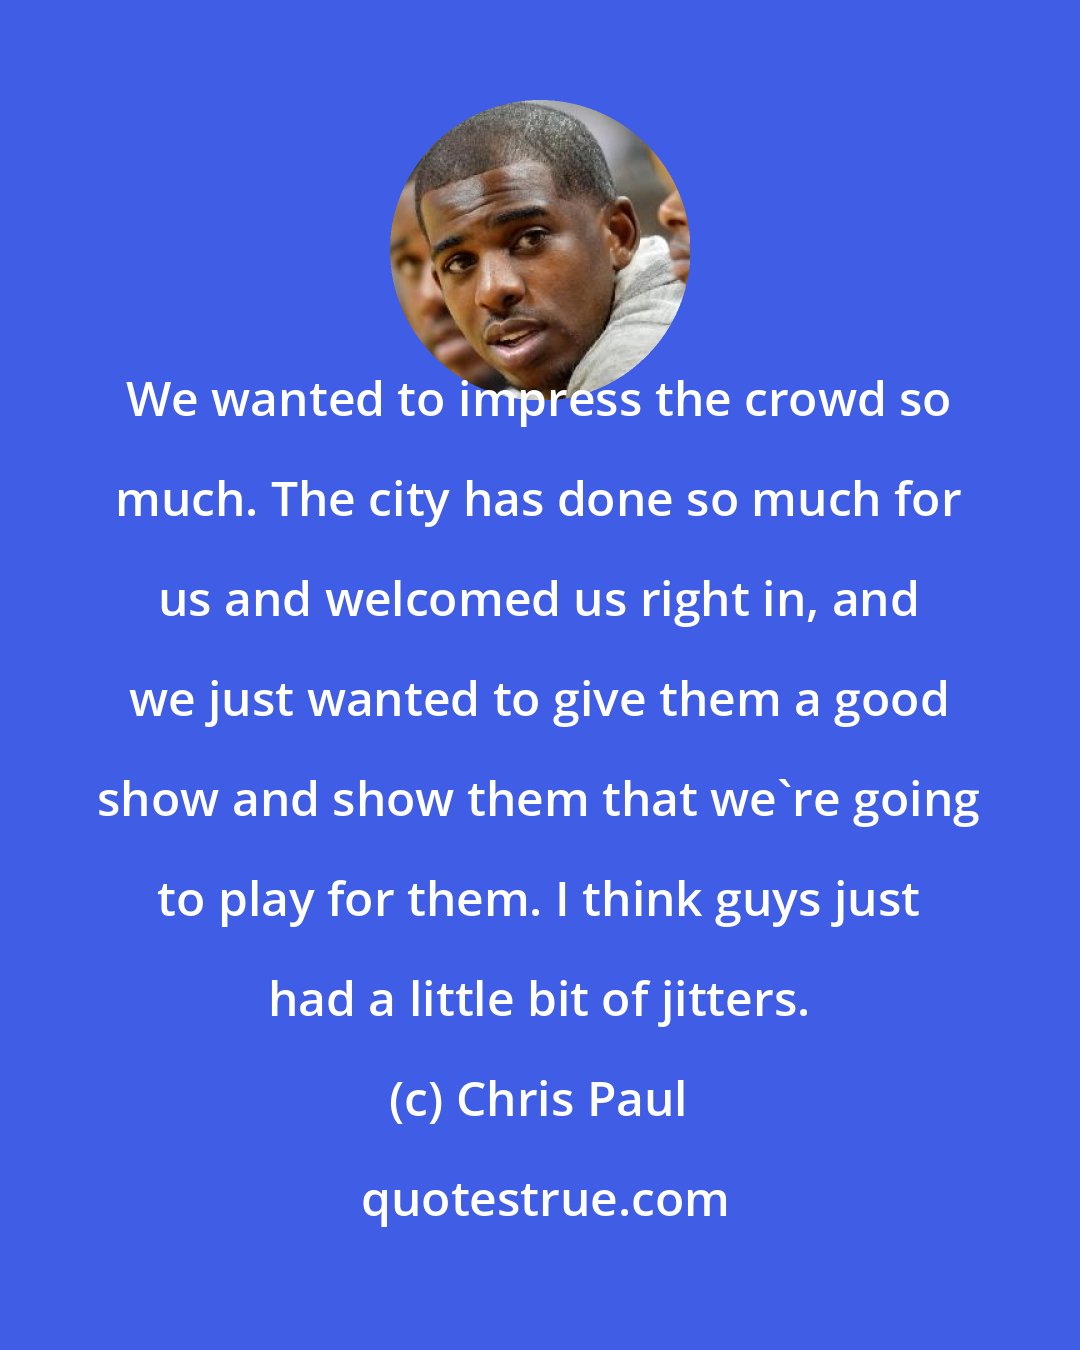 Chris Paul: We wanted to impress the crowd so much. The city has done so much for us and welcomed us right in, and we just wanted to give them a good show and show them that we're going to play for them. I think guys just had a little bit of jitters.